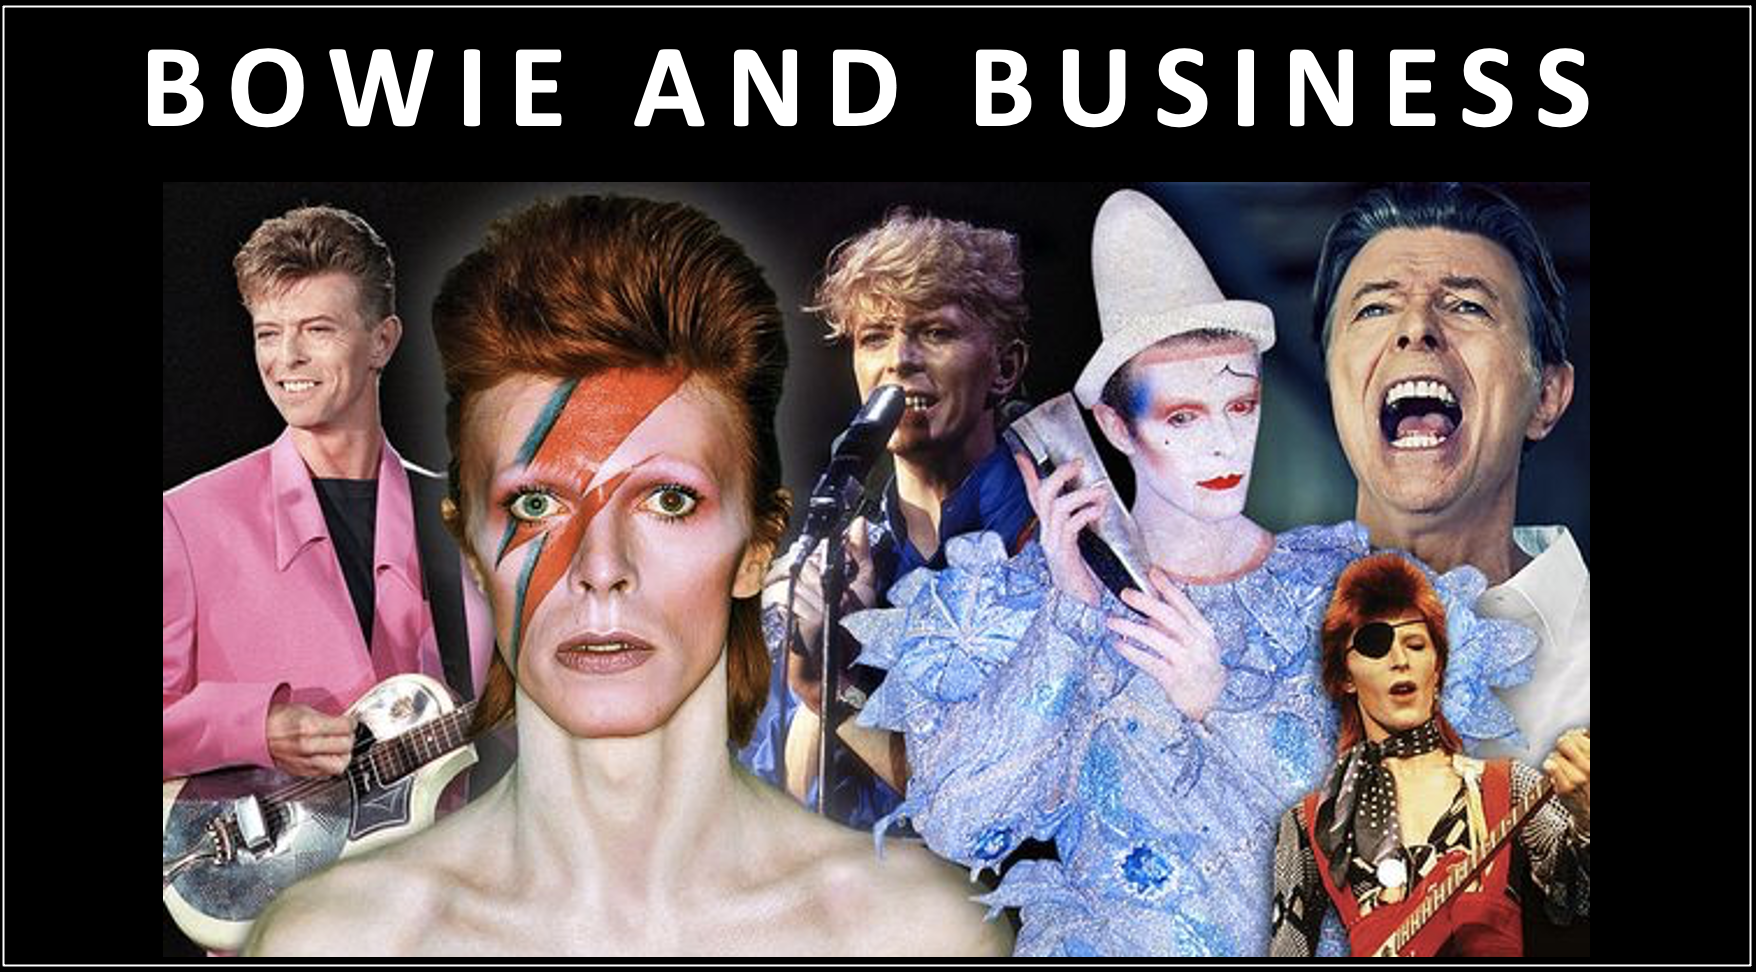 David Bowie and Business